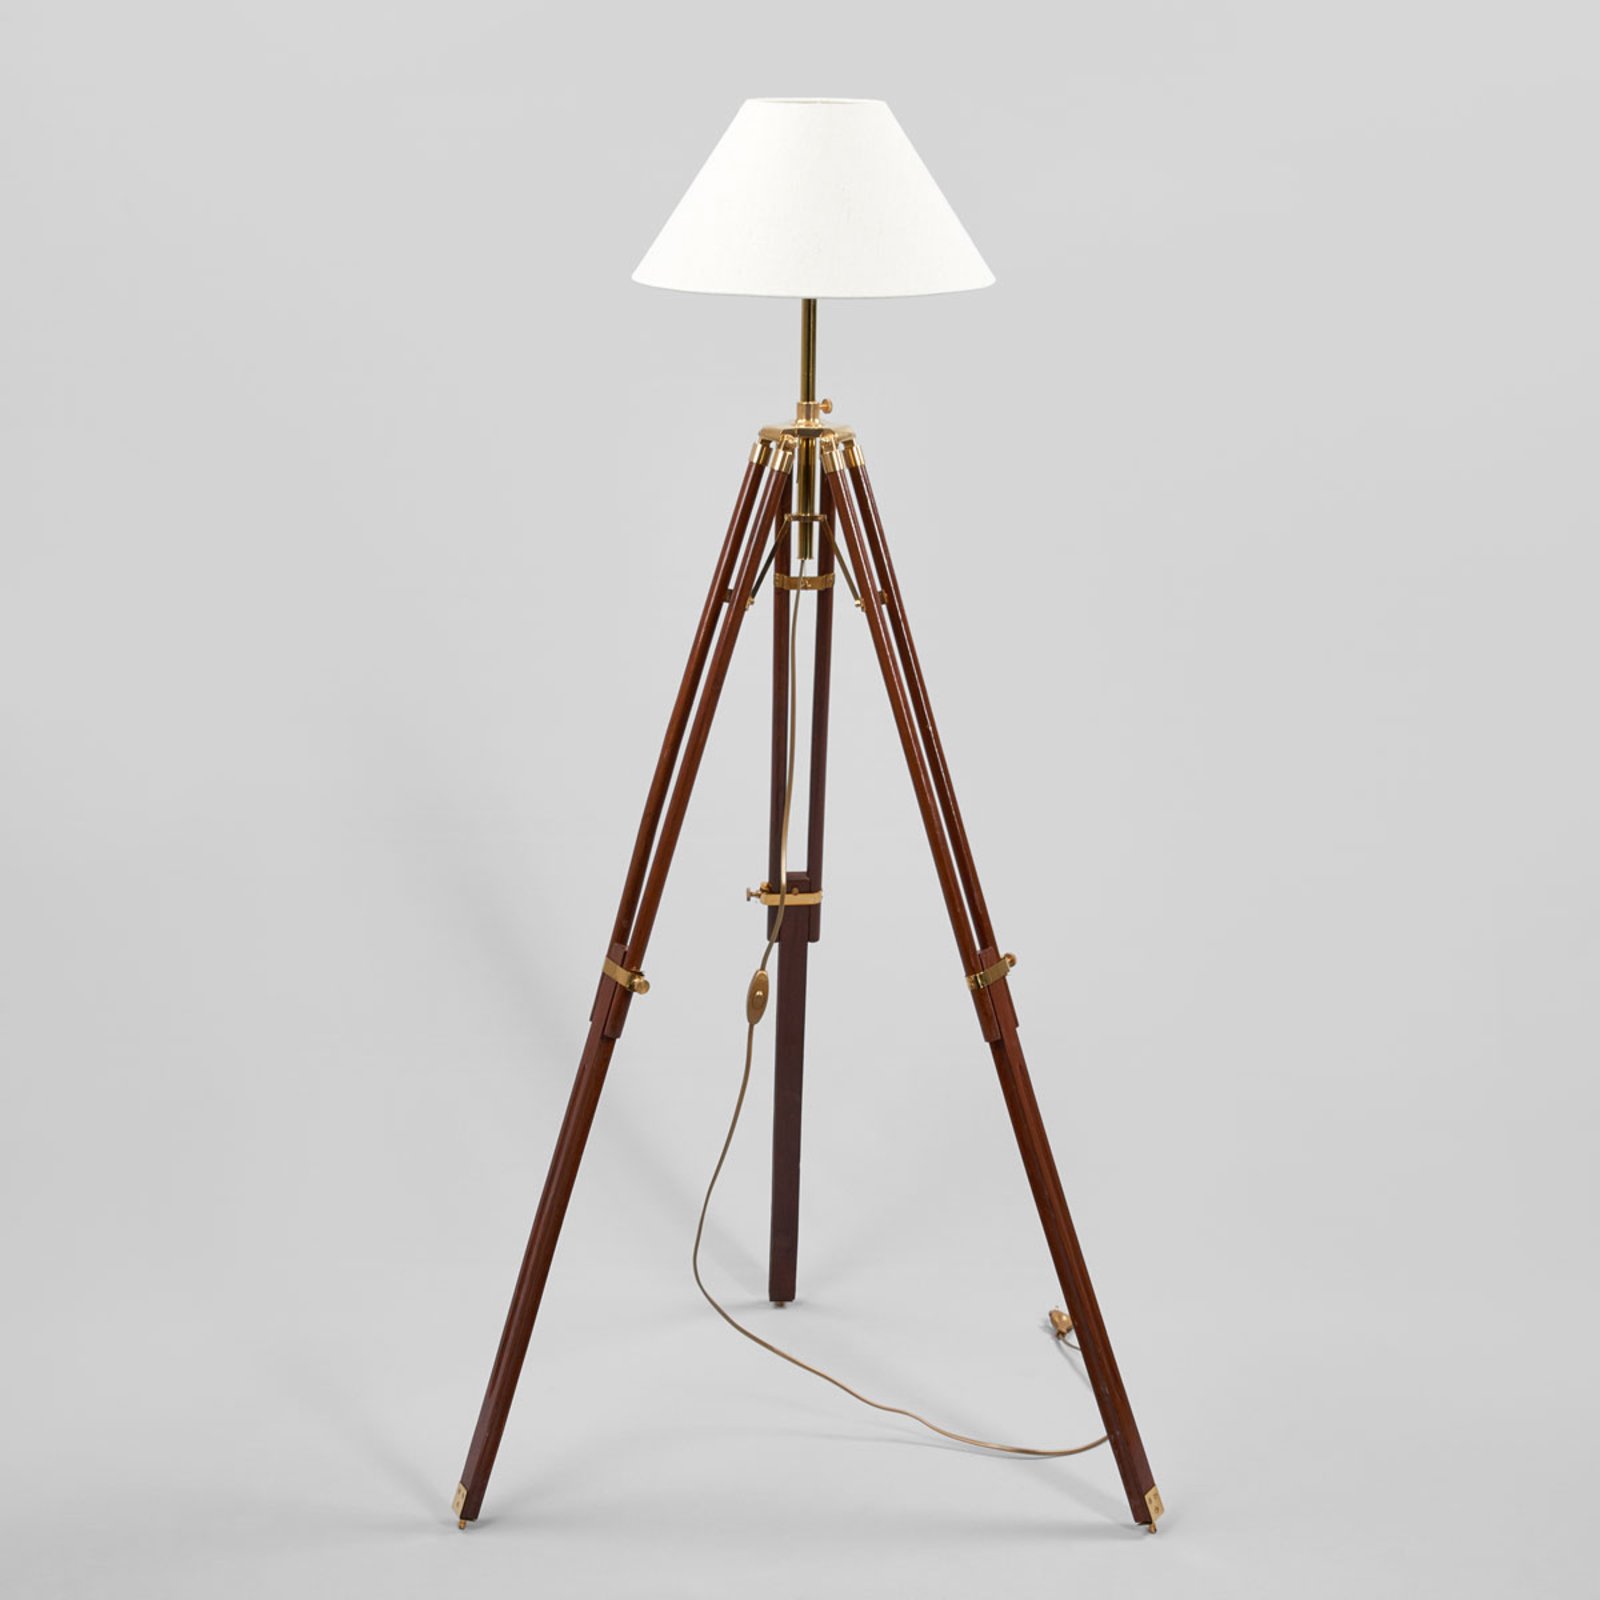 Magnificent floor lamp STATIV with white lampshade